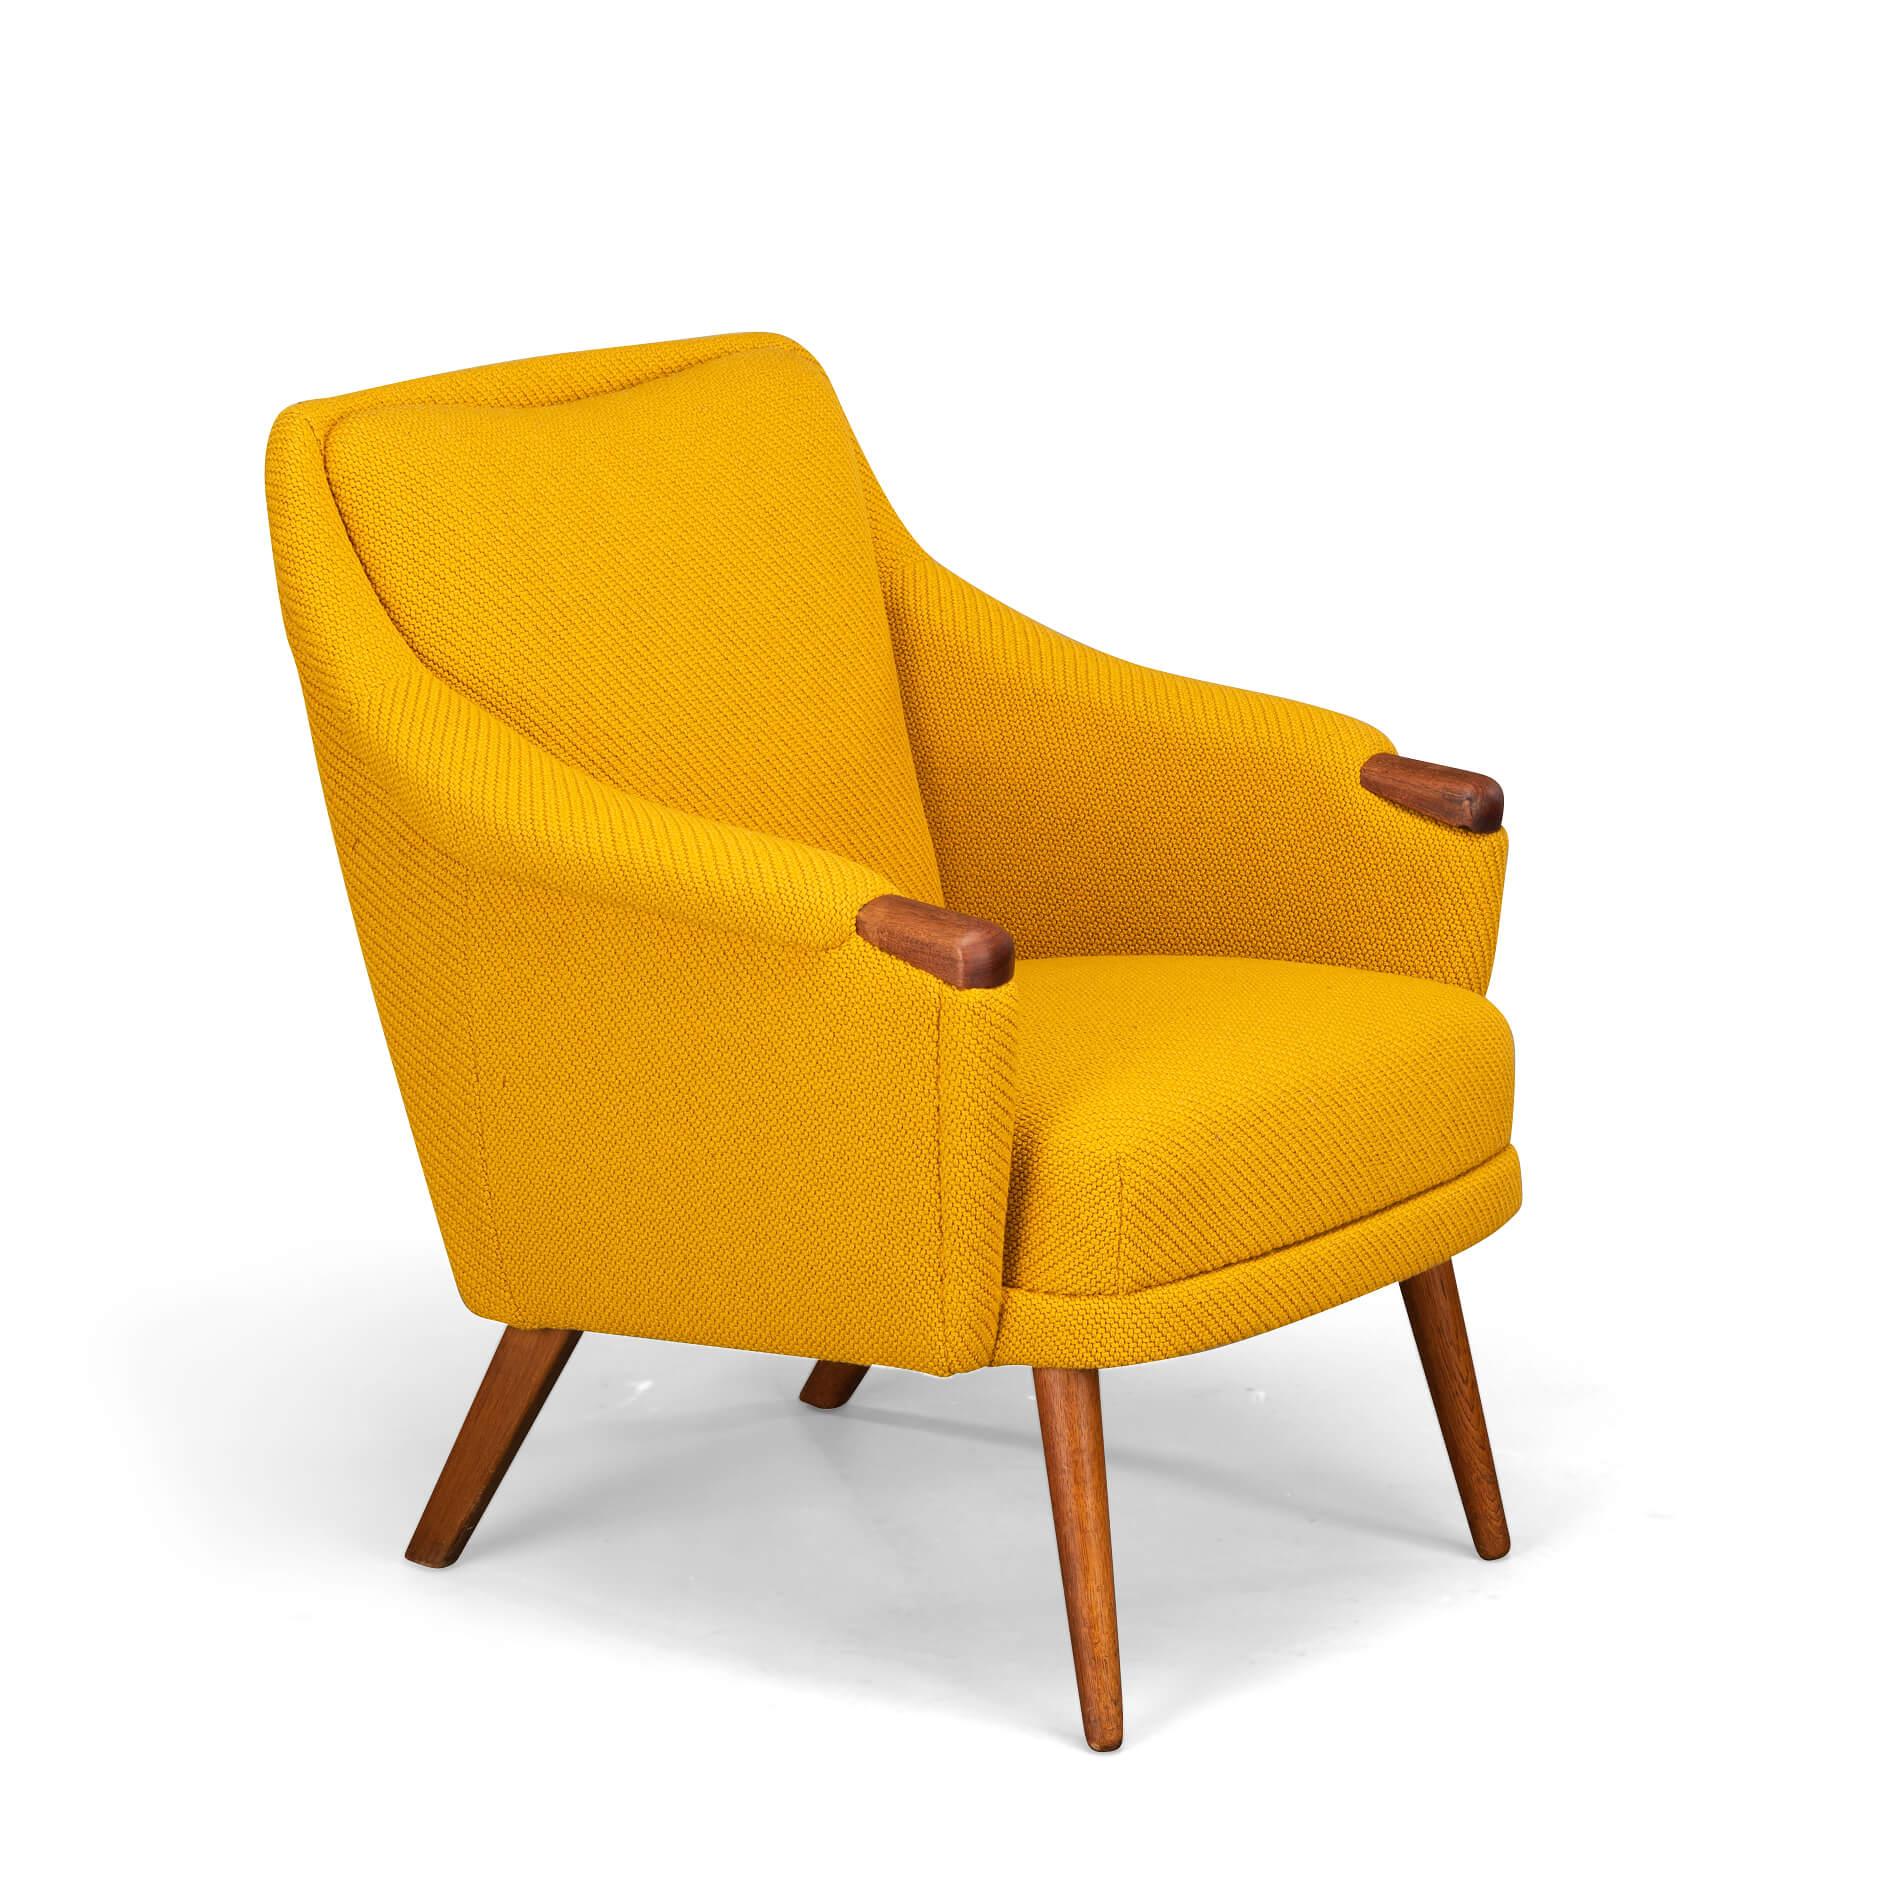 Edgy Johannes Andersen armchair for CFC Silkeborg in stunning new upholstery. This chair is reupholstered with Kvadrat, Coda 2 in full accordance with the original upholstery as designed by Andersen. This sofa has a spacious yet straight seat